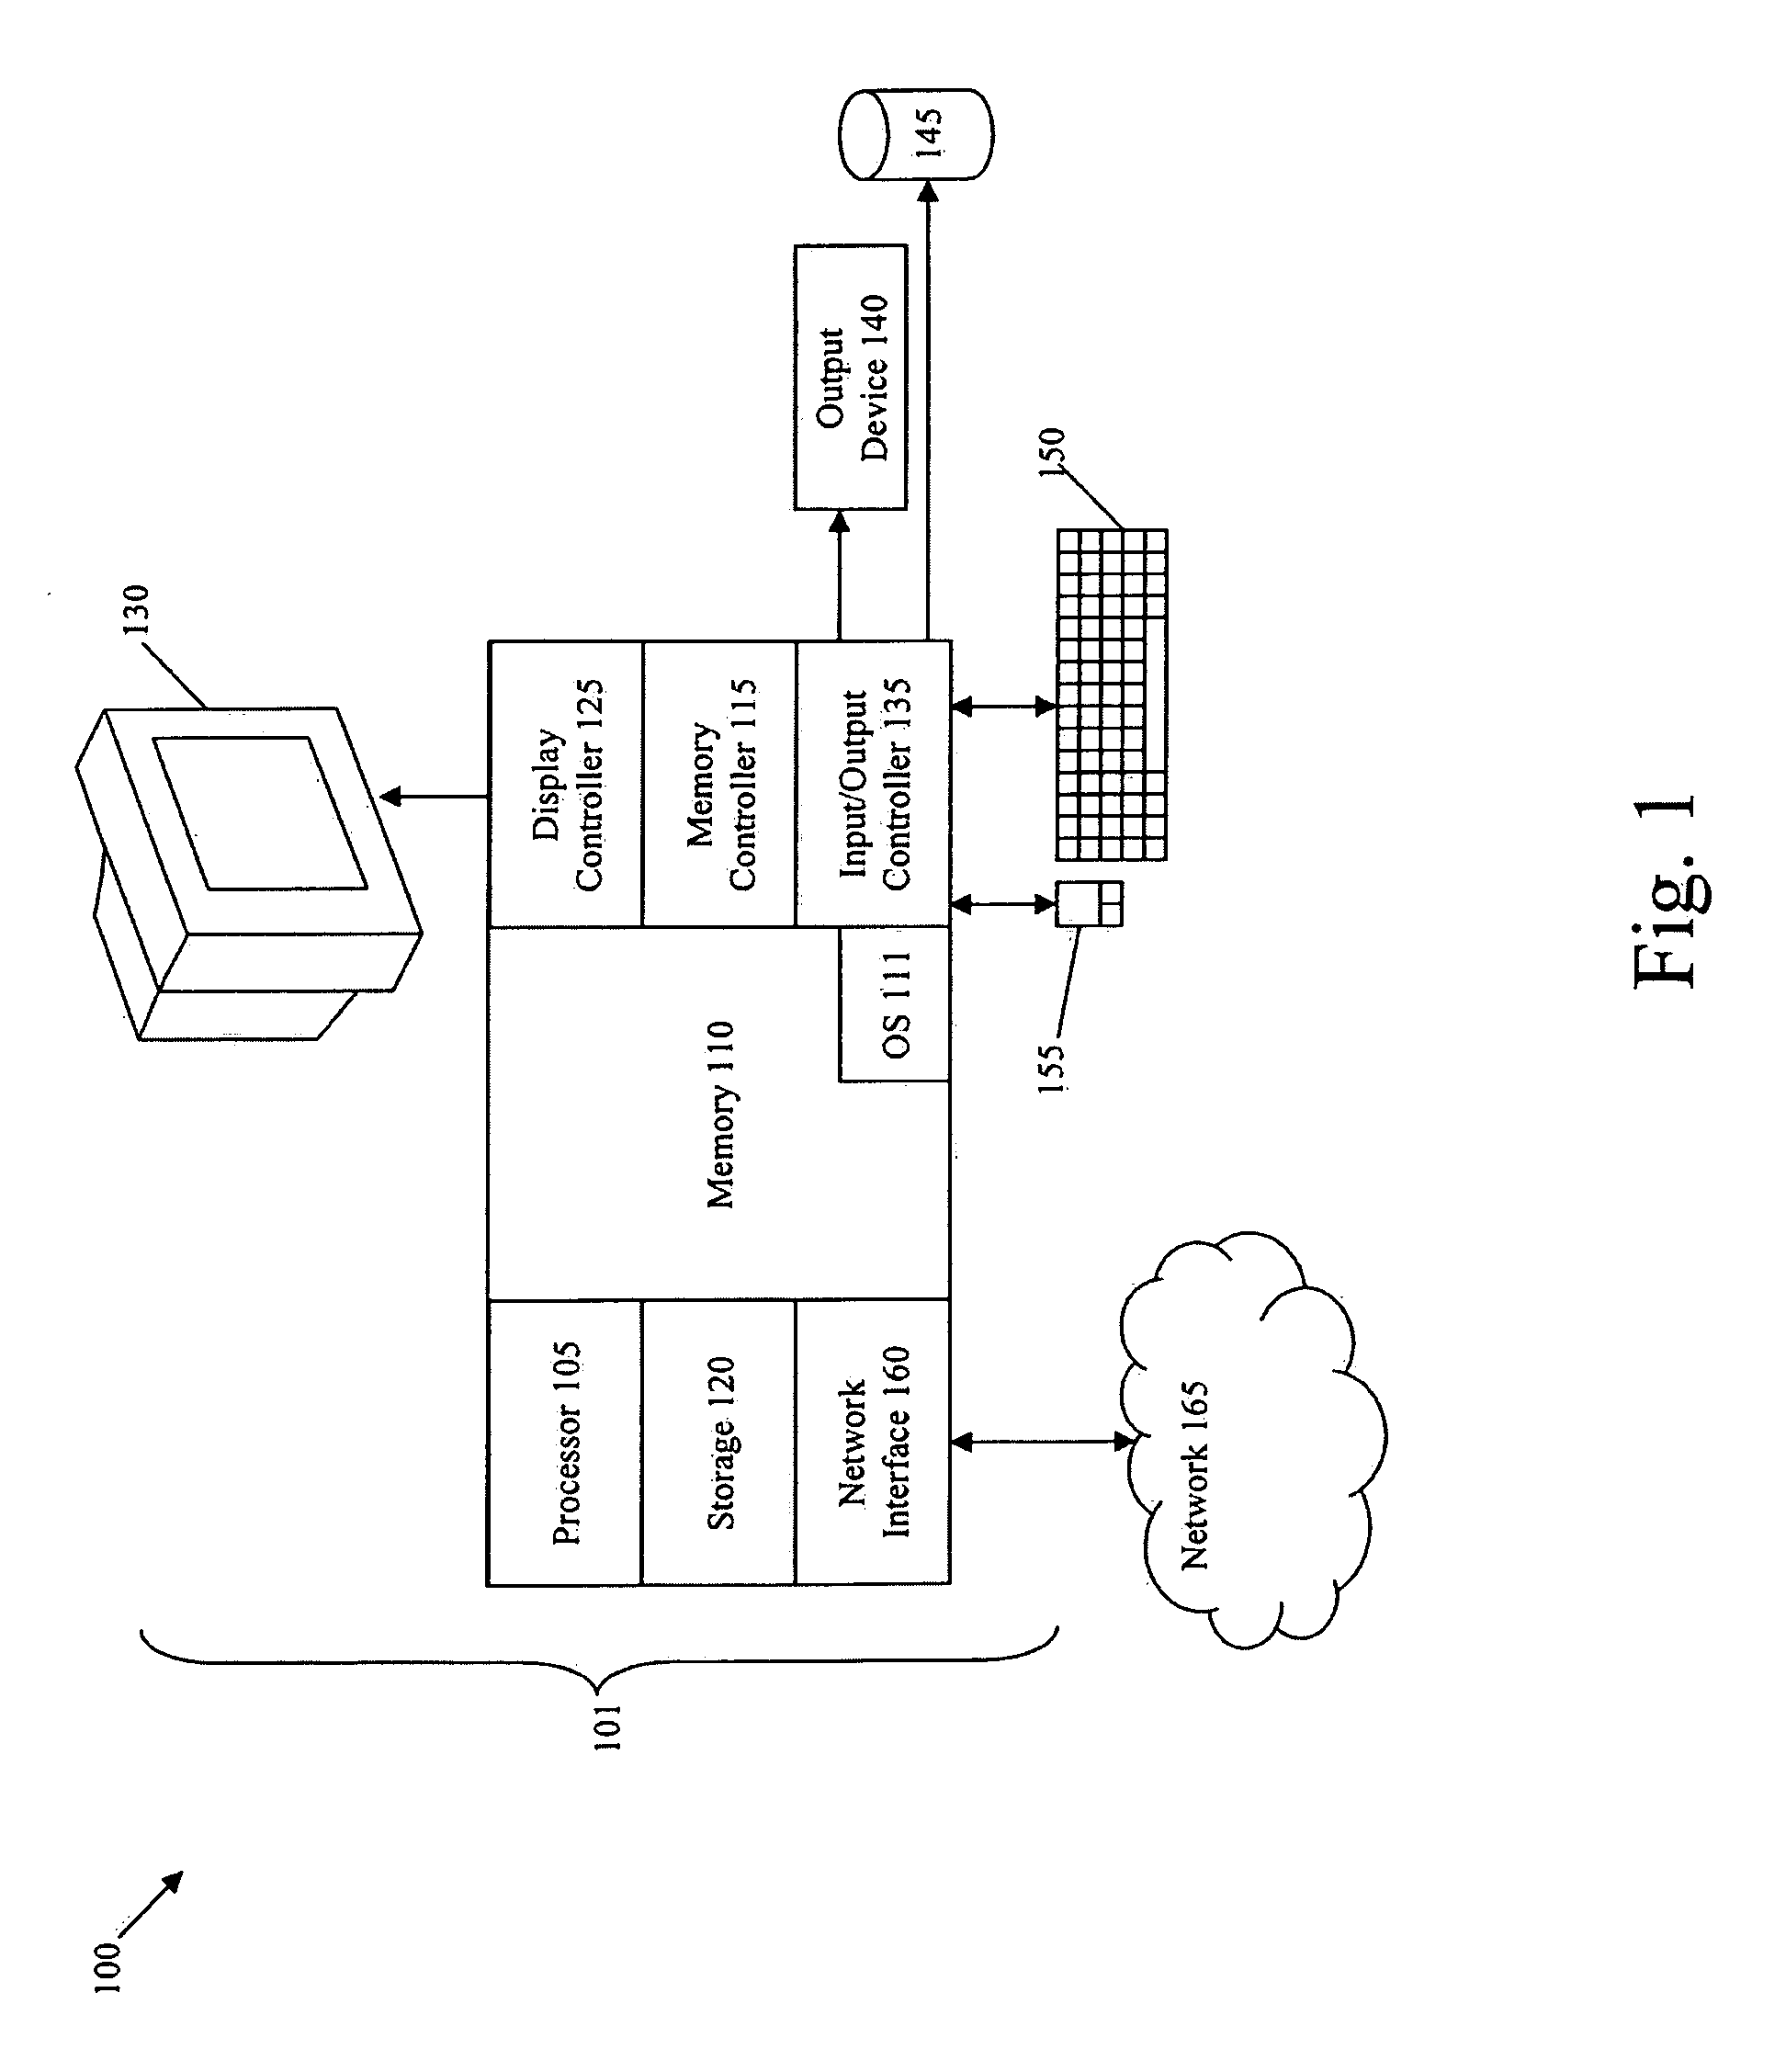 Method, system and computer program product for exploiting orthogonal control vectors in timing driven systems